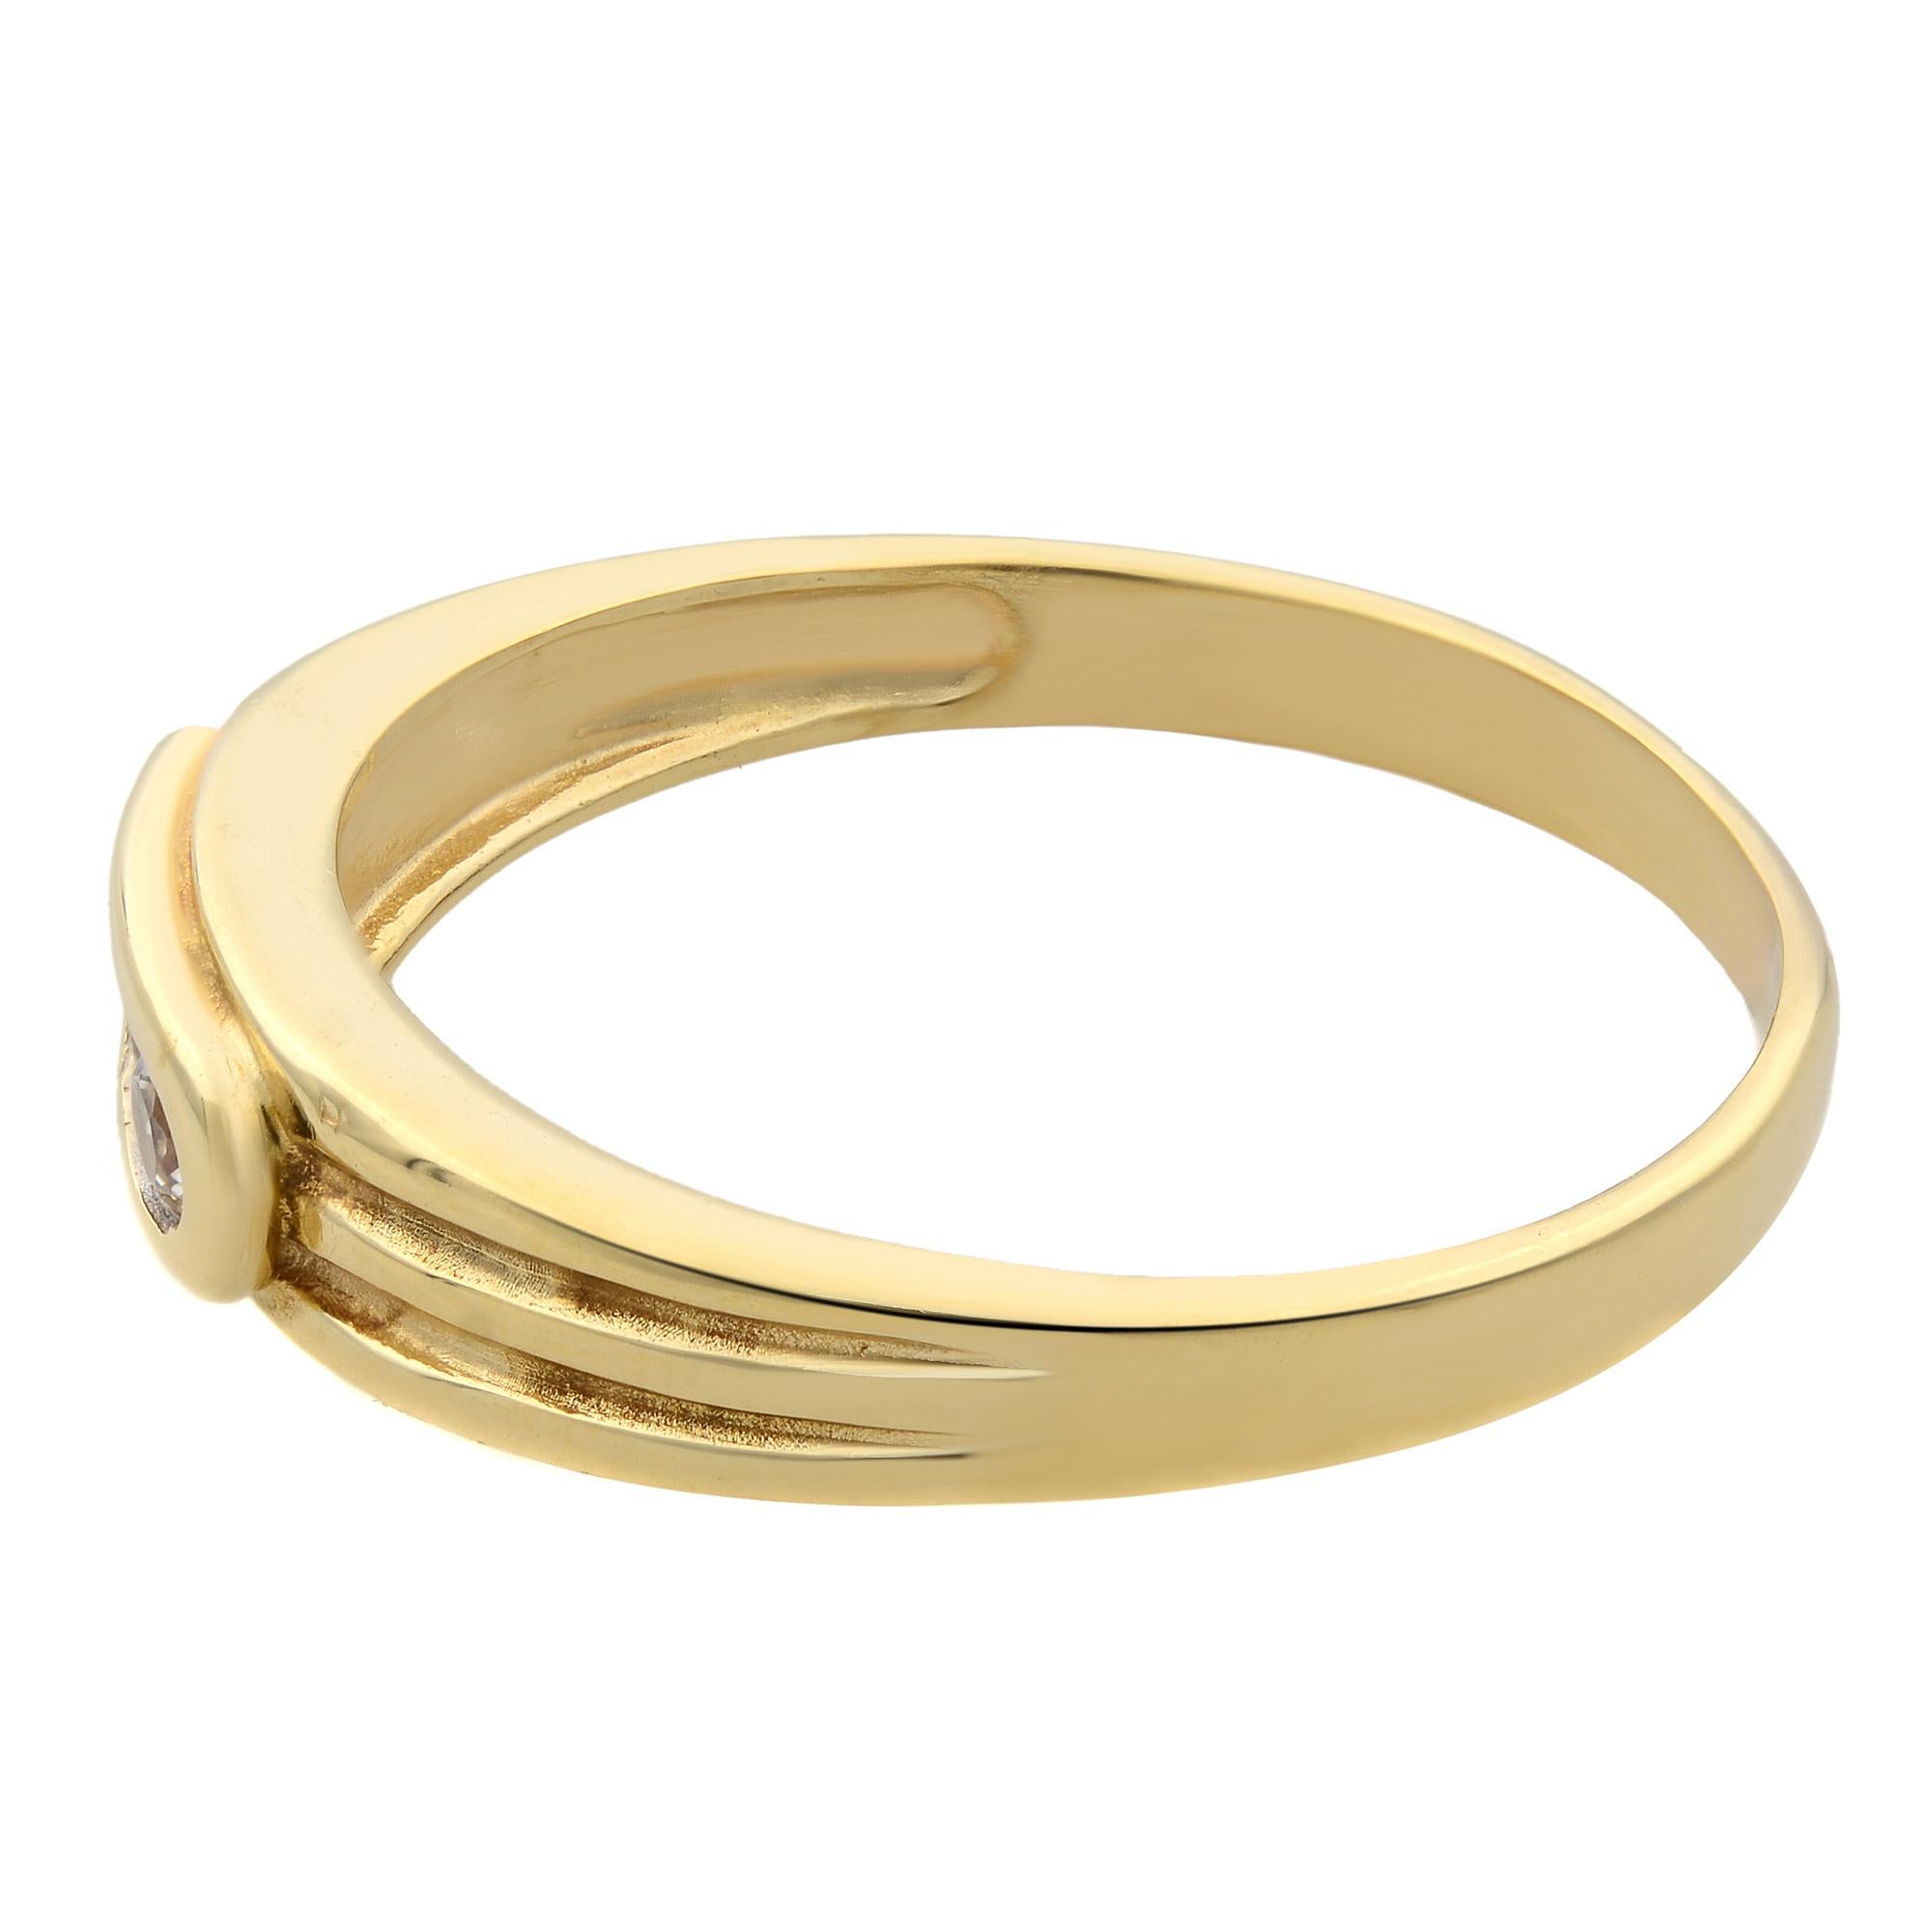 Rachel Koen 0.25Cttw Diamond Ladies Band Ring 14K Yellow Gold Size 9.75 In Excellent Condition For Sale In New York, NY